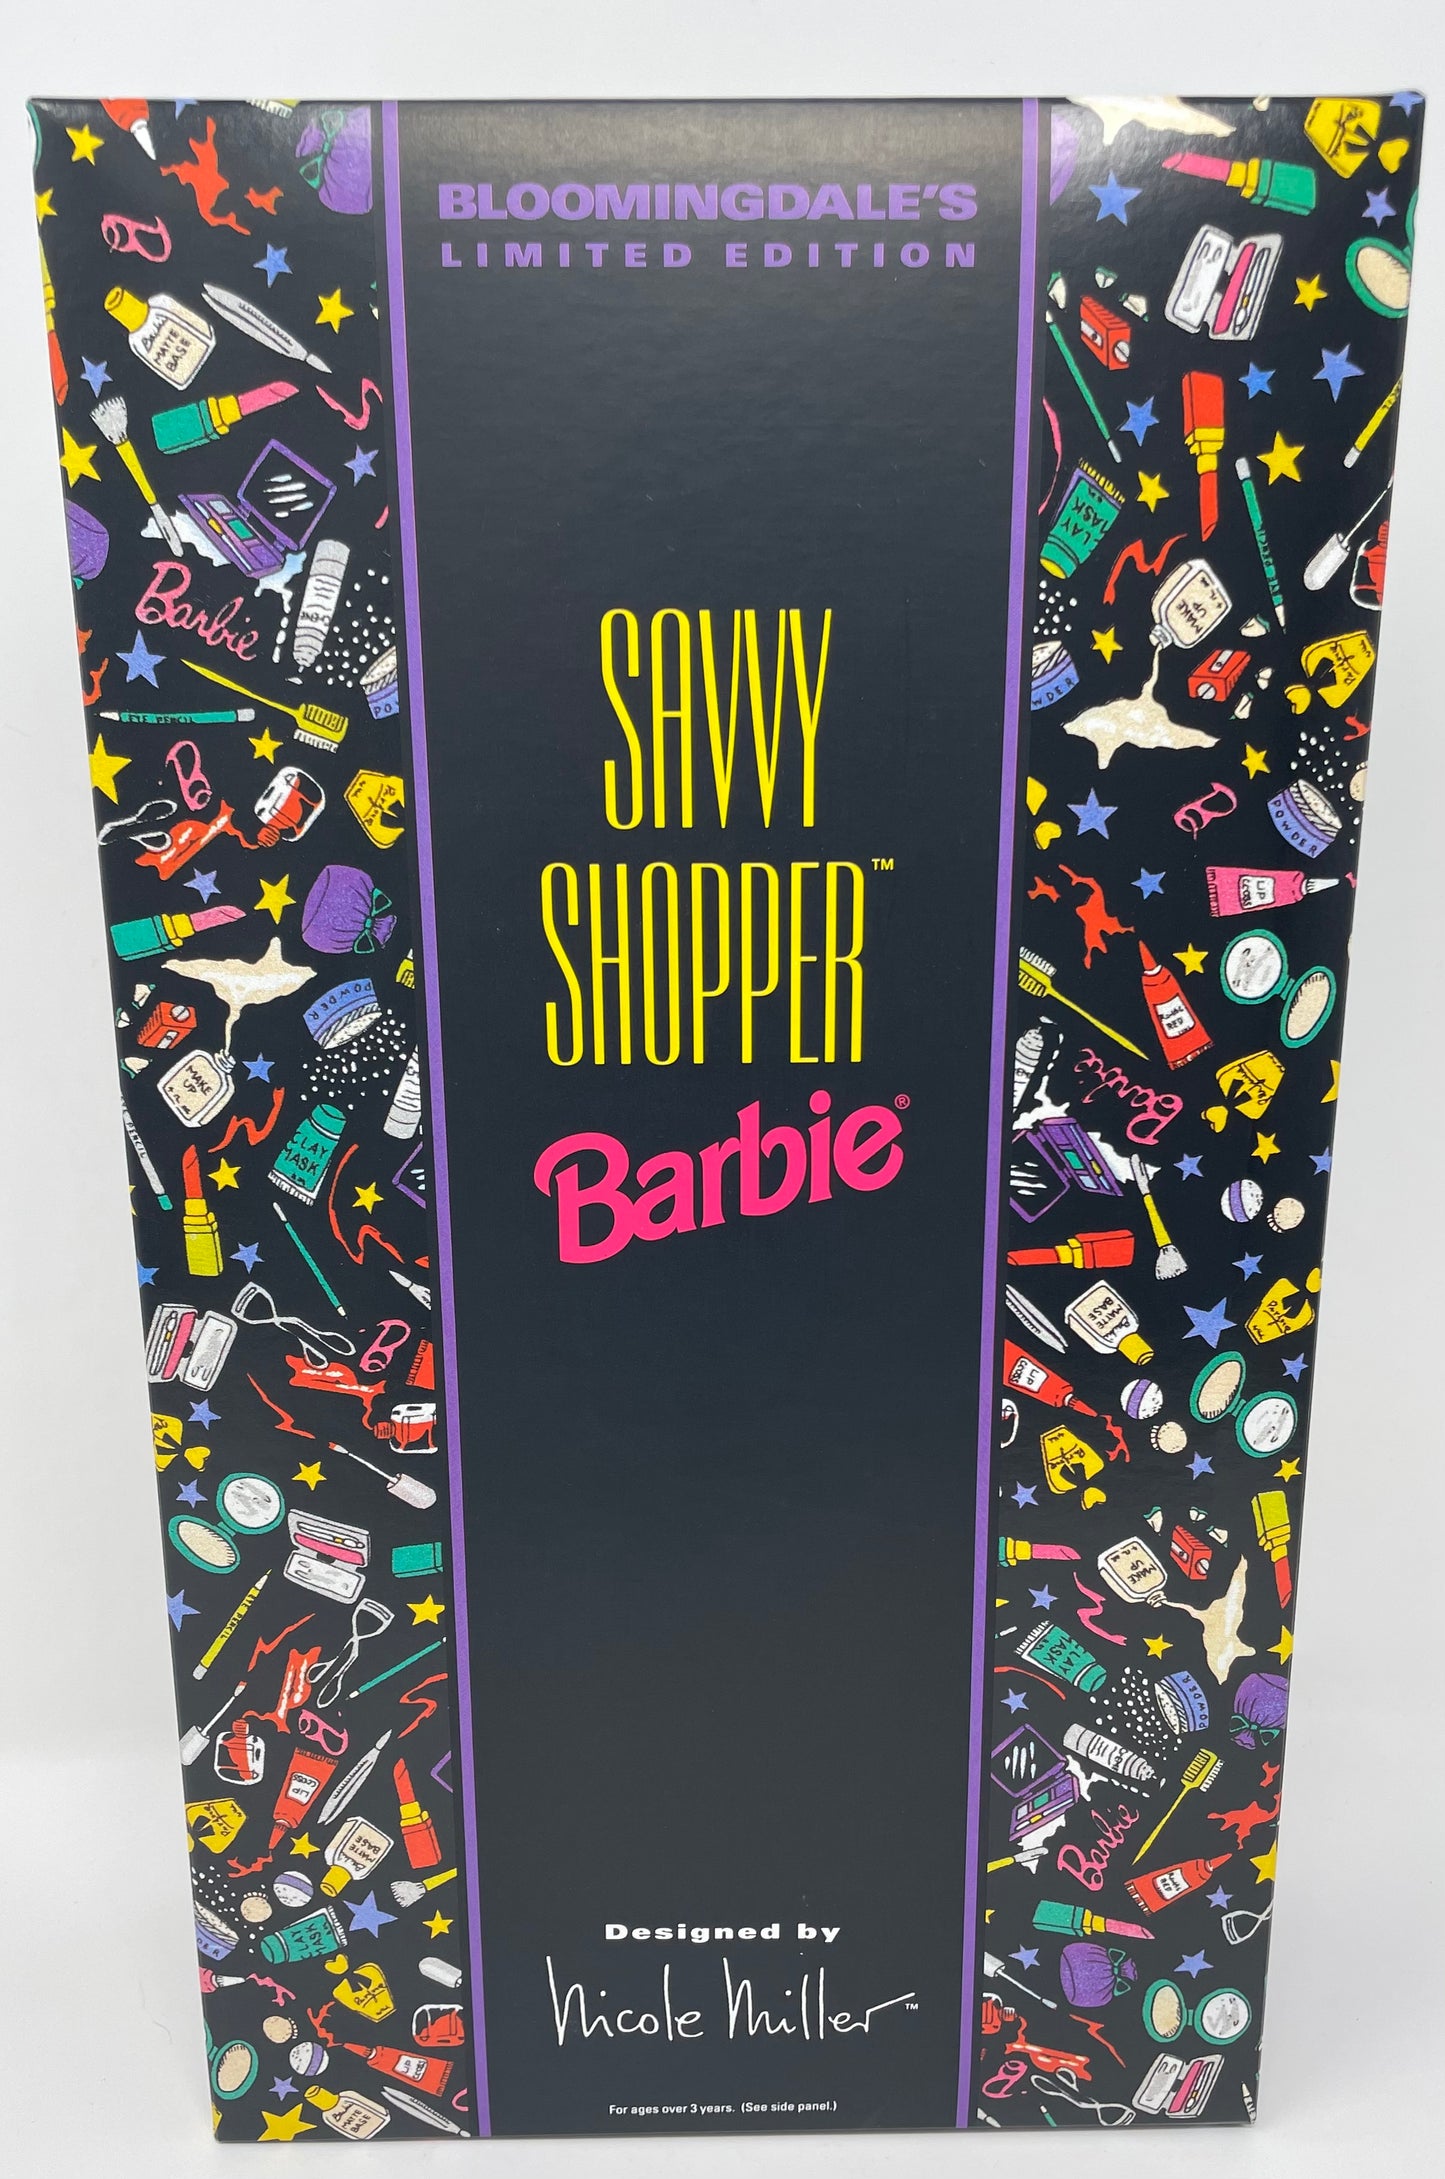 SAVVY SHOPPER BARBIE DESIGNED BY NICOLE MILLER - BLOOMINGDALE'S LIMITED EDITION - #12152 - MATTEL 1994 (2 OF 2)